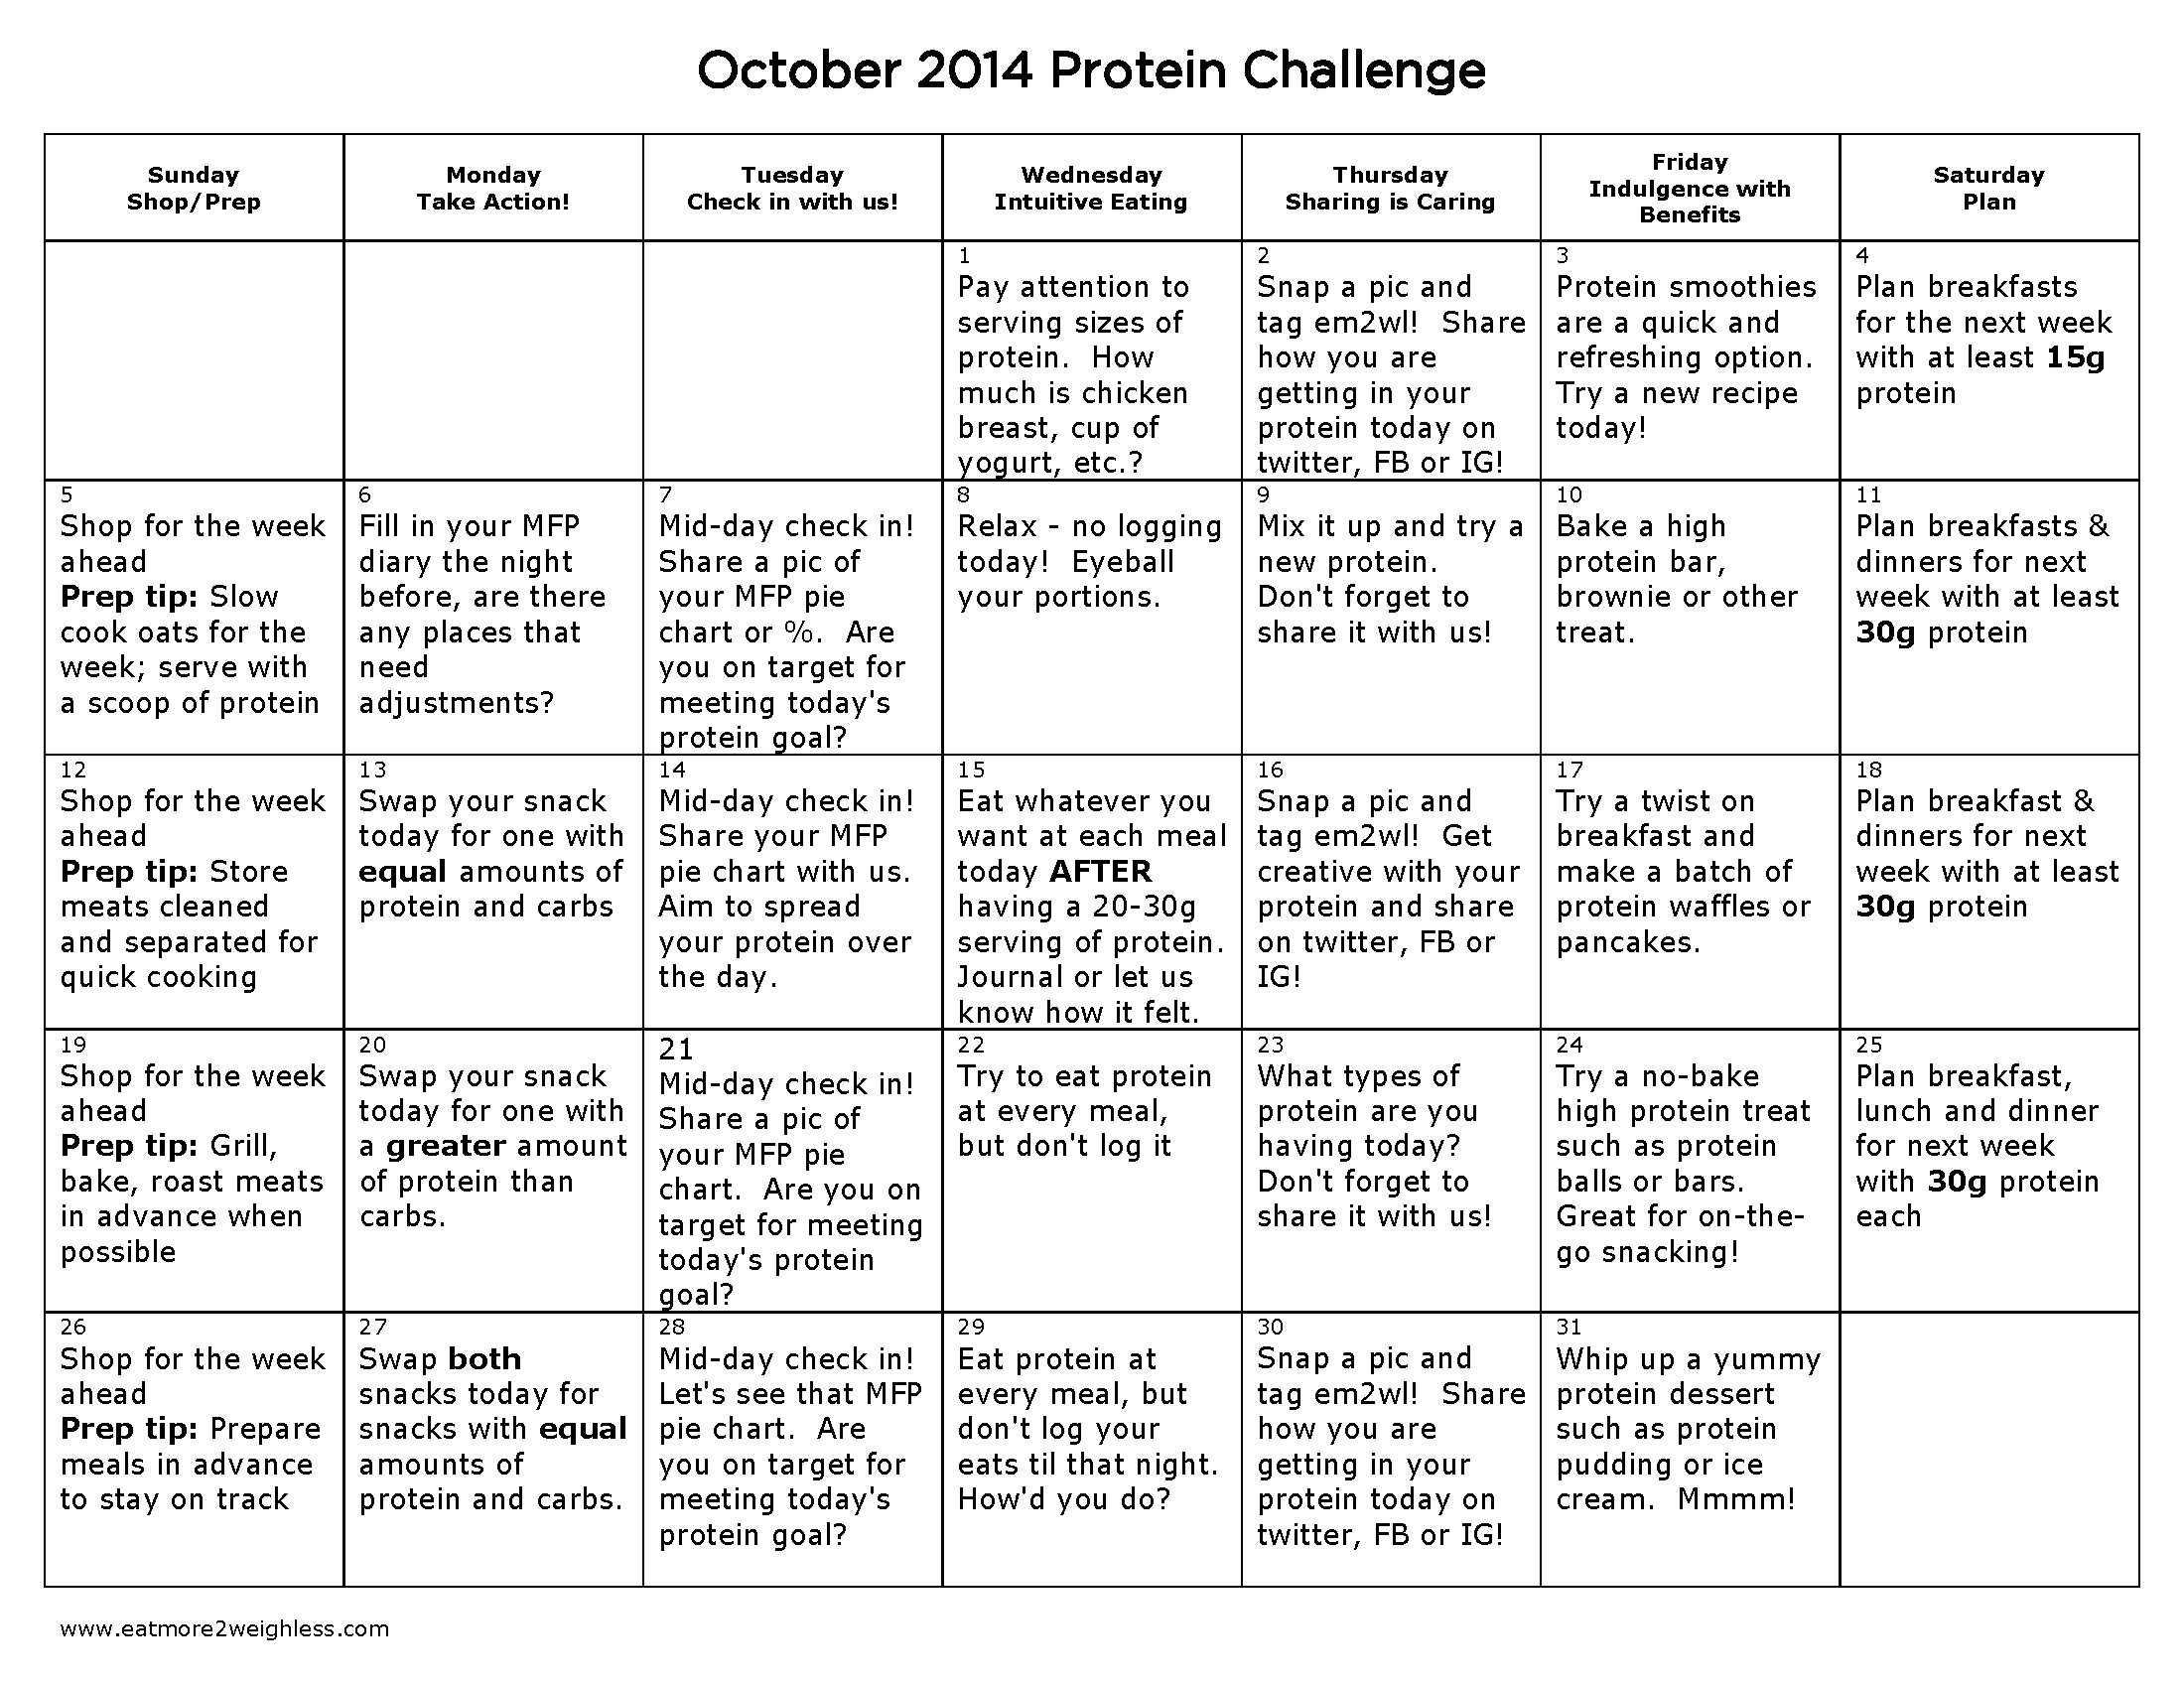 October 2014 Challenge: Hitting Your Protein Goals